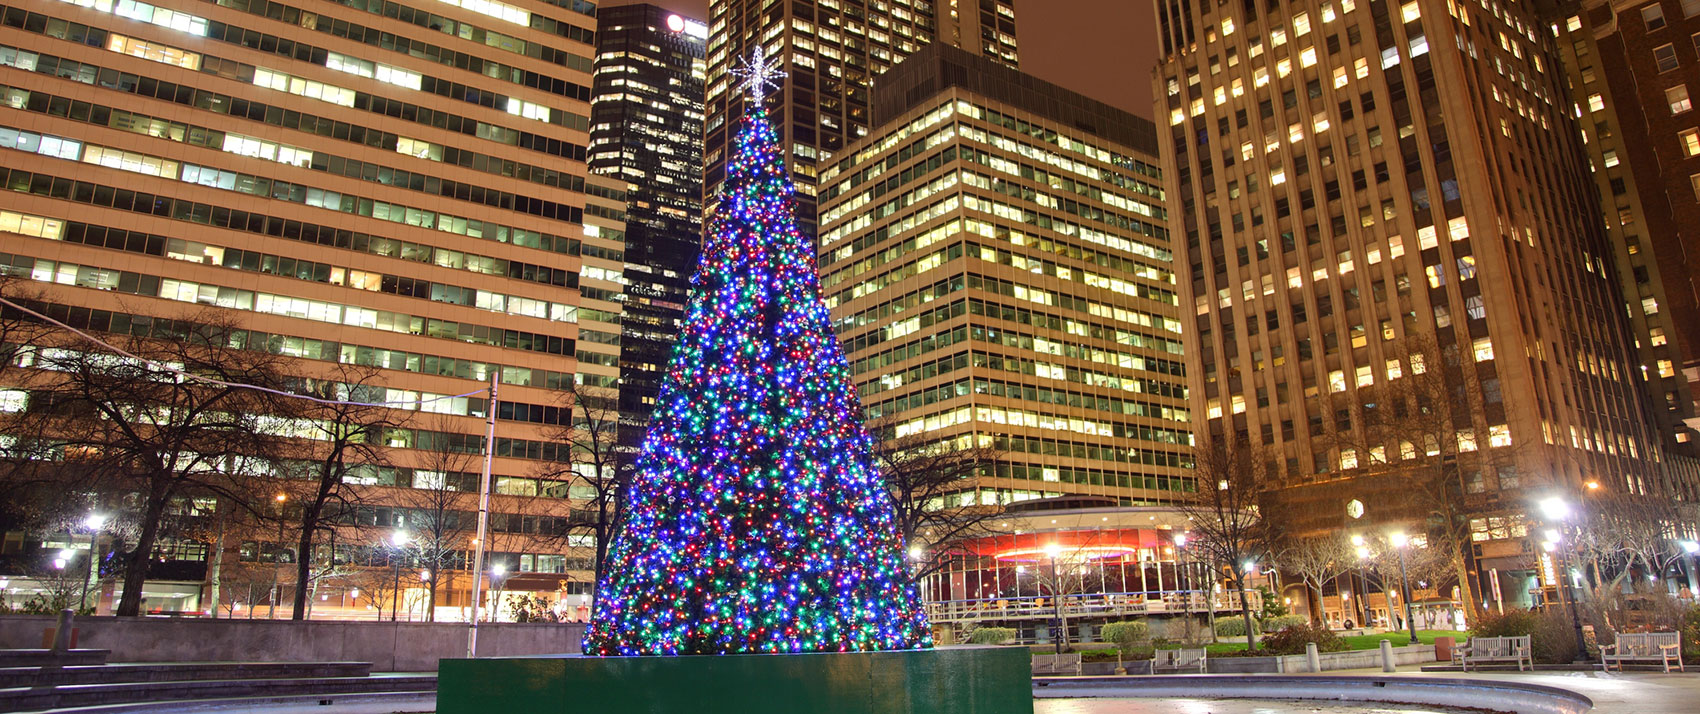 Large Christmas tree lit up at night in downtown Philadelphia